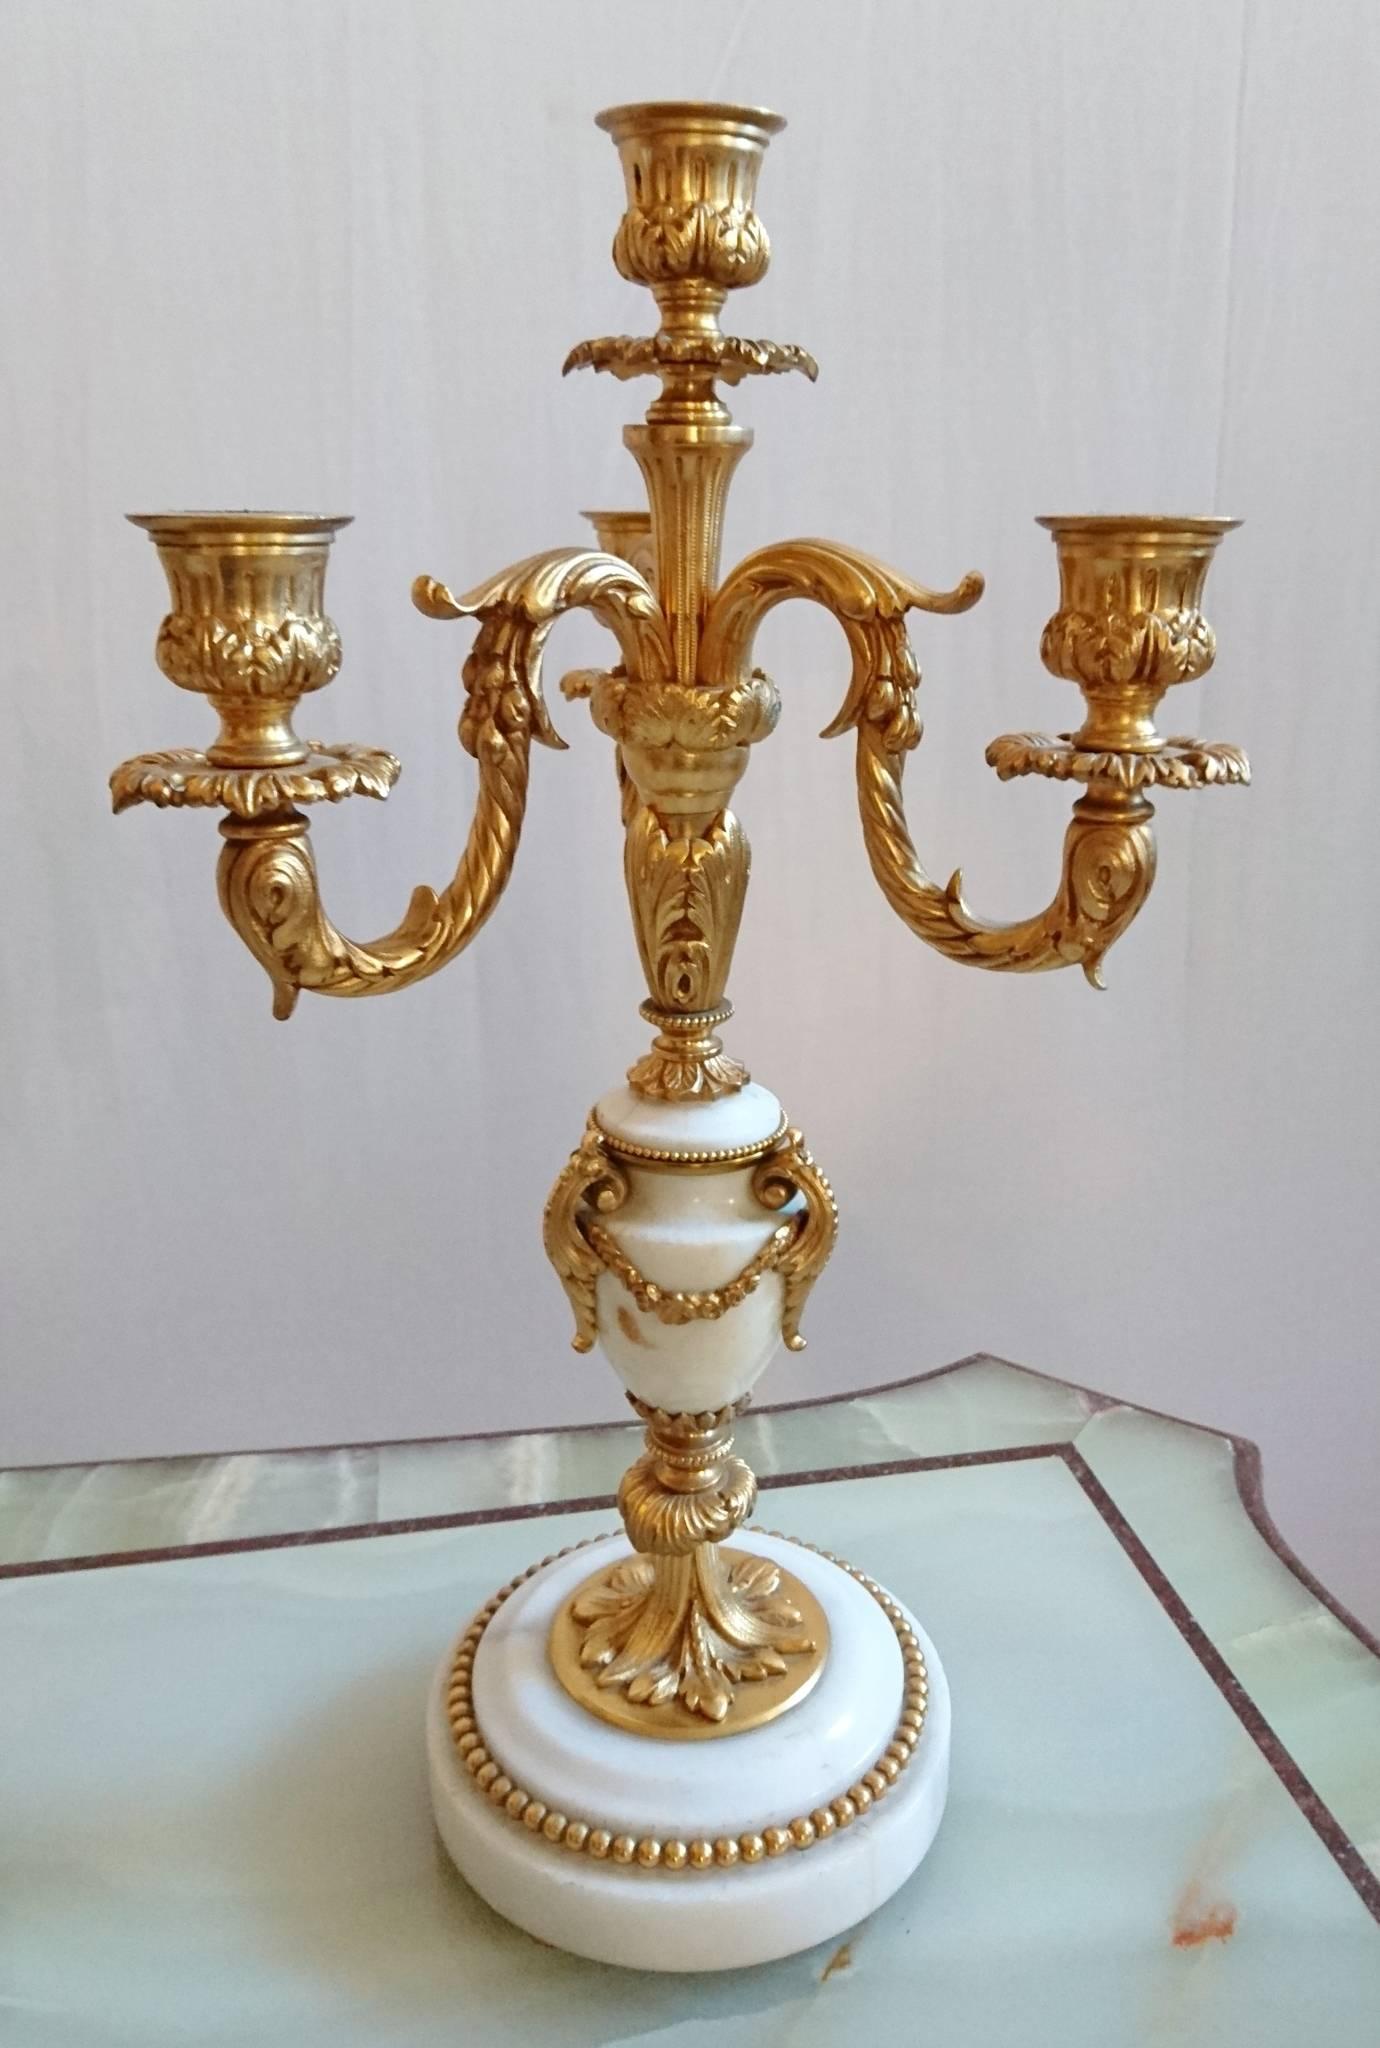 Rococo French Ormolu and White Marble Mantle Clock and Candelabra Garniture